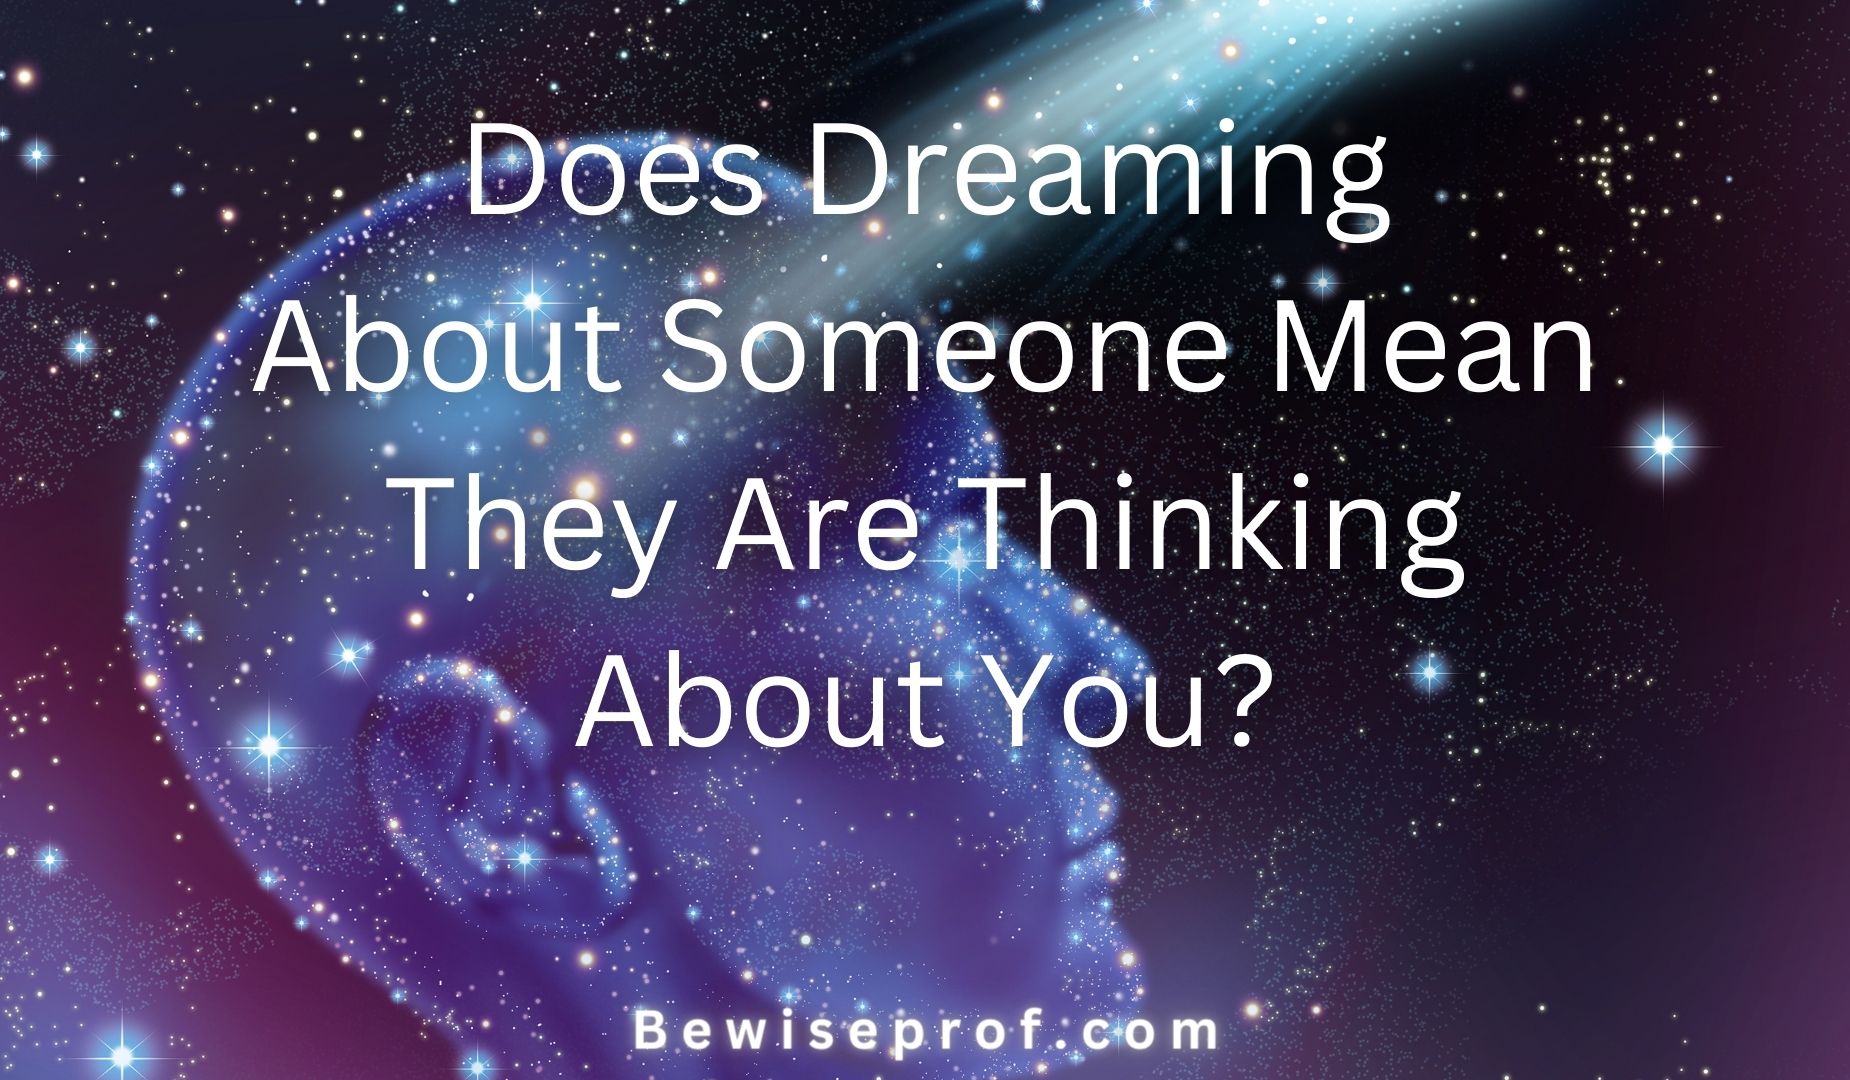 Does Dreaming About Someone Mean They Are Thinking About You? Answers